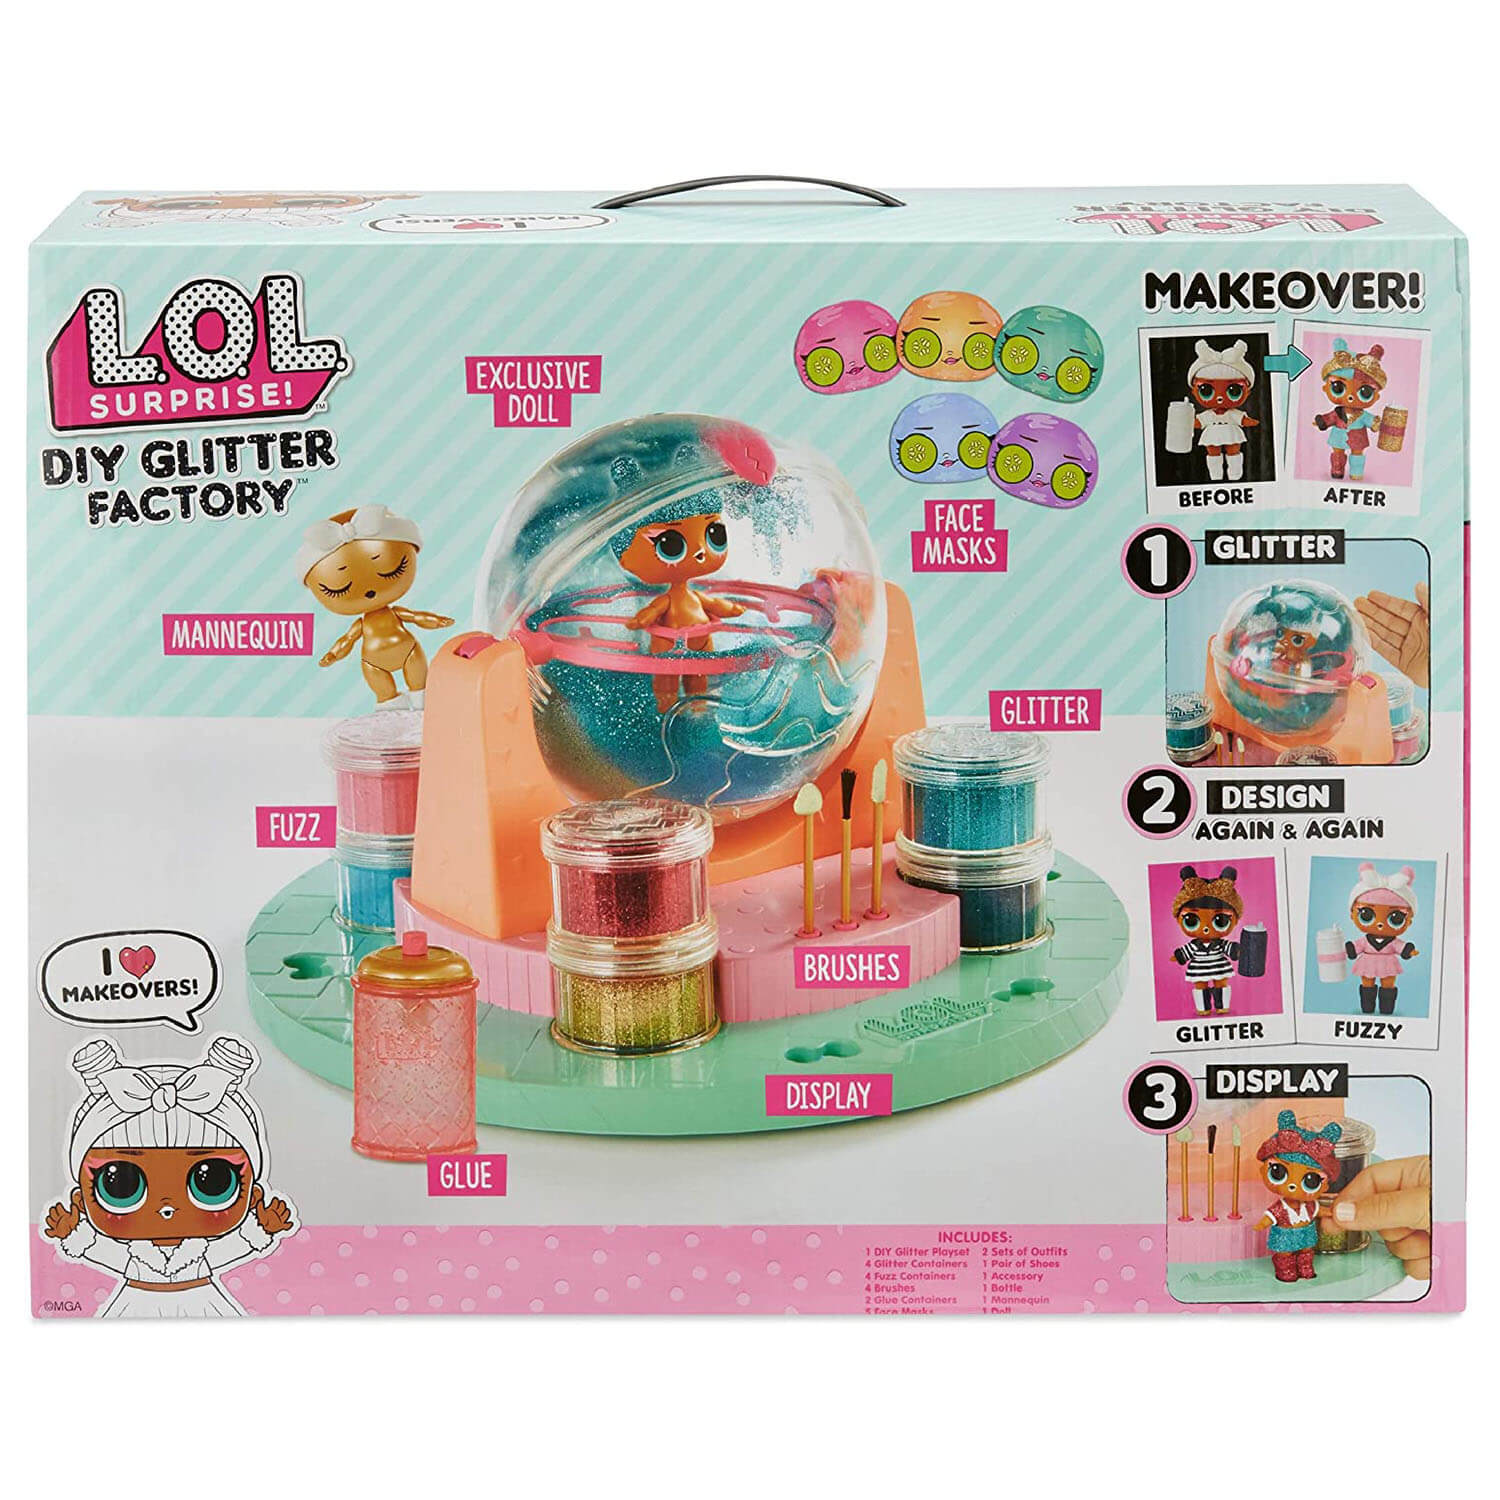 Front view of the L.O.L. Surprise DIY Glitter Factory package.